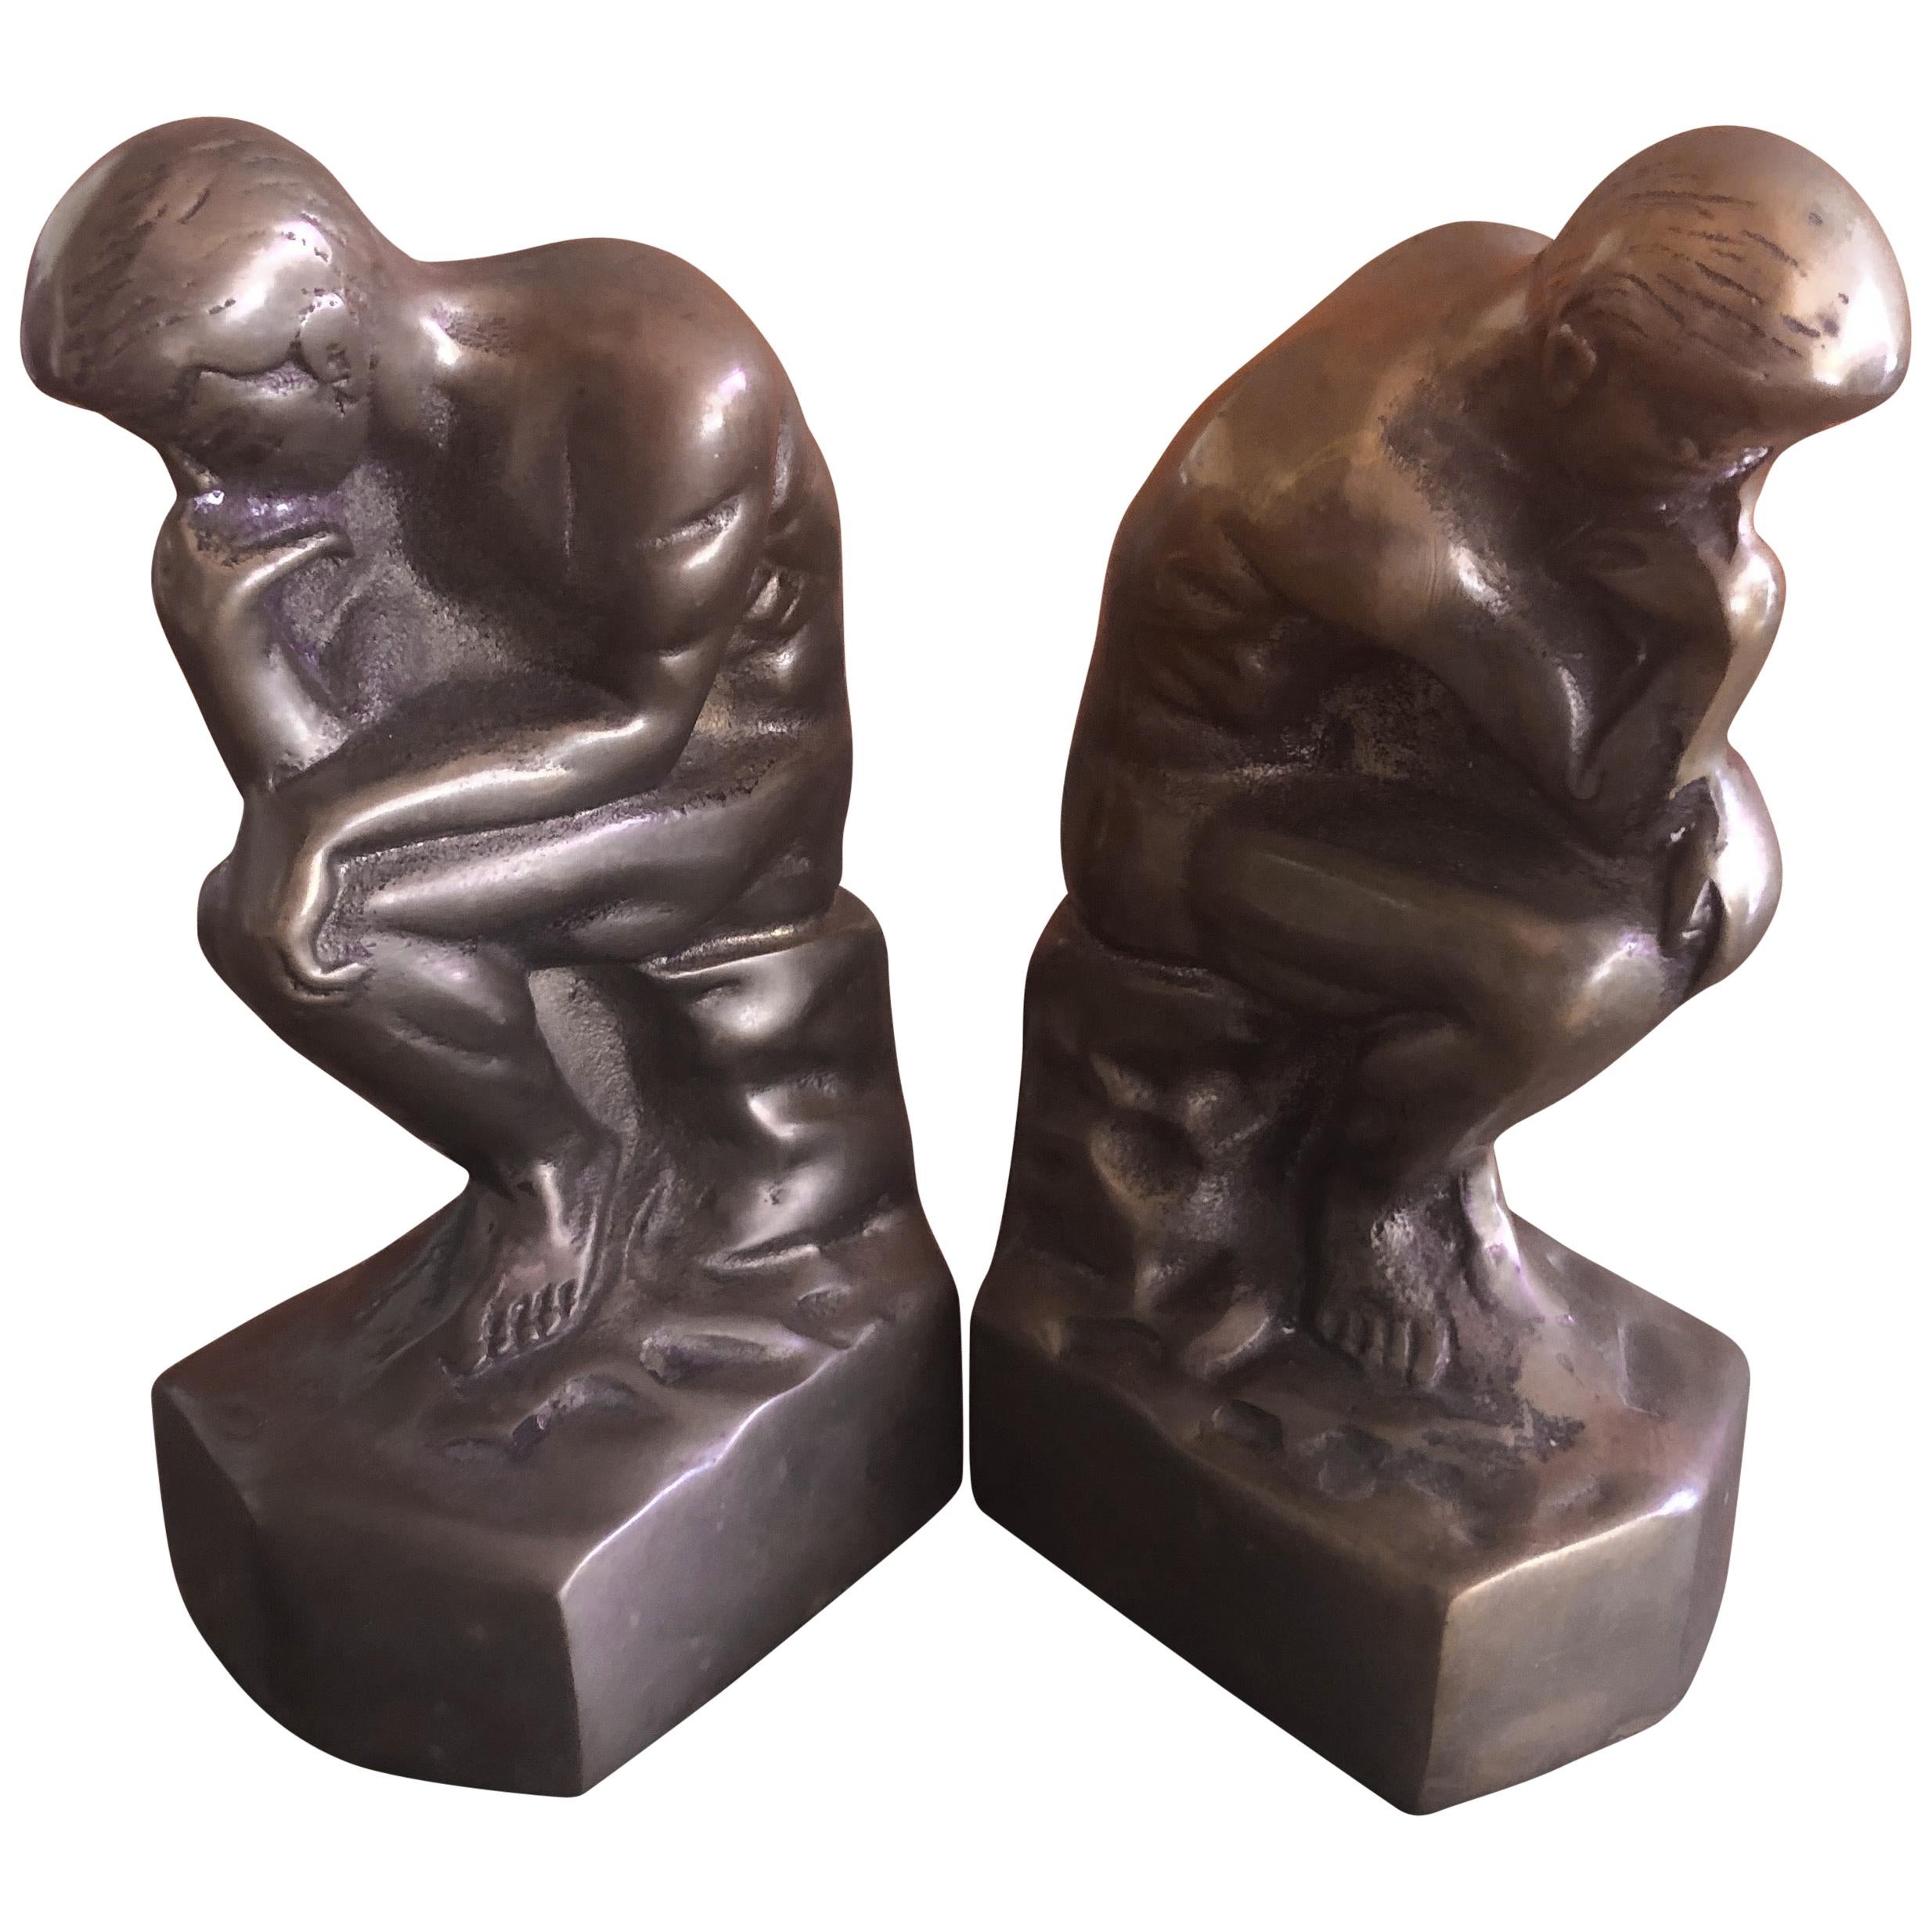 Pair of Brass "Thinker" Bookends in the Style of Auguste Rodin